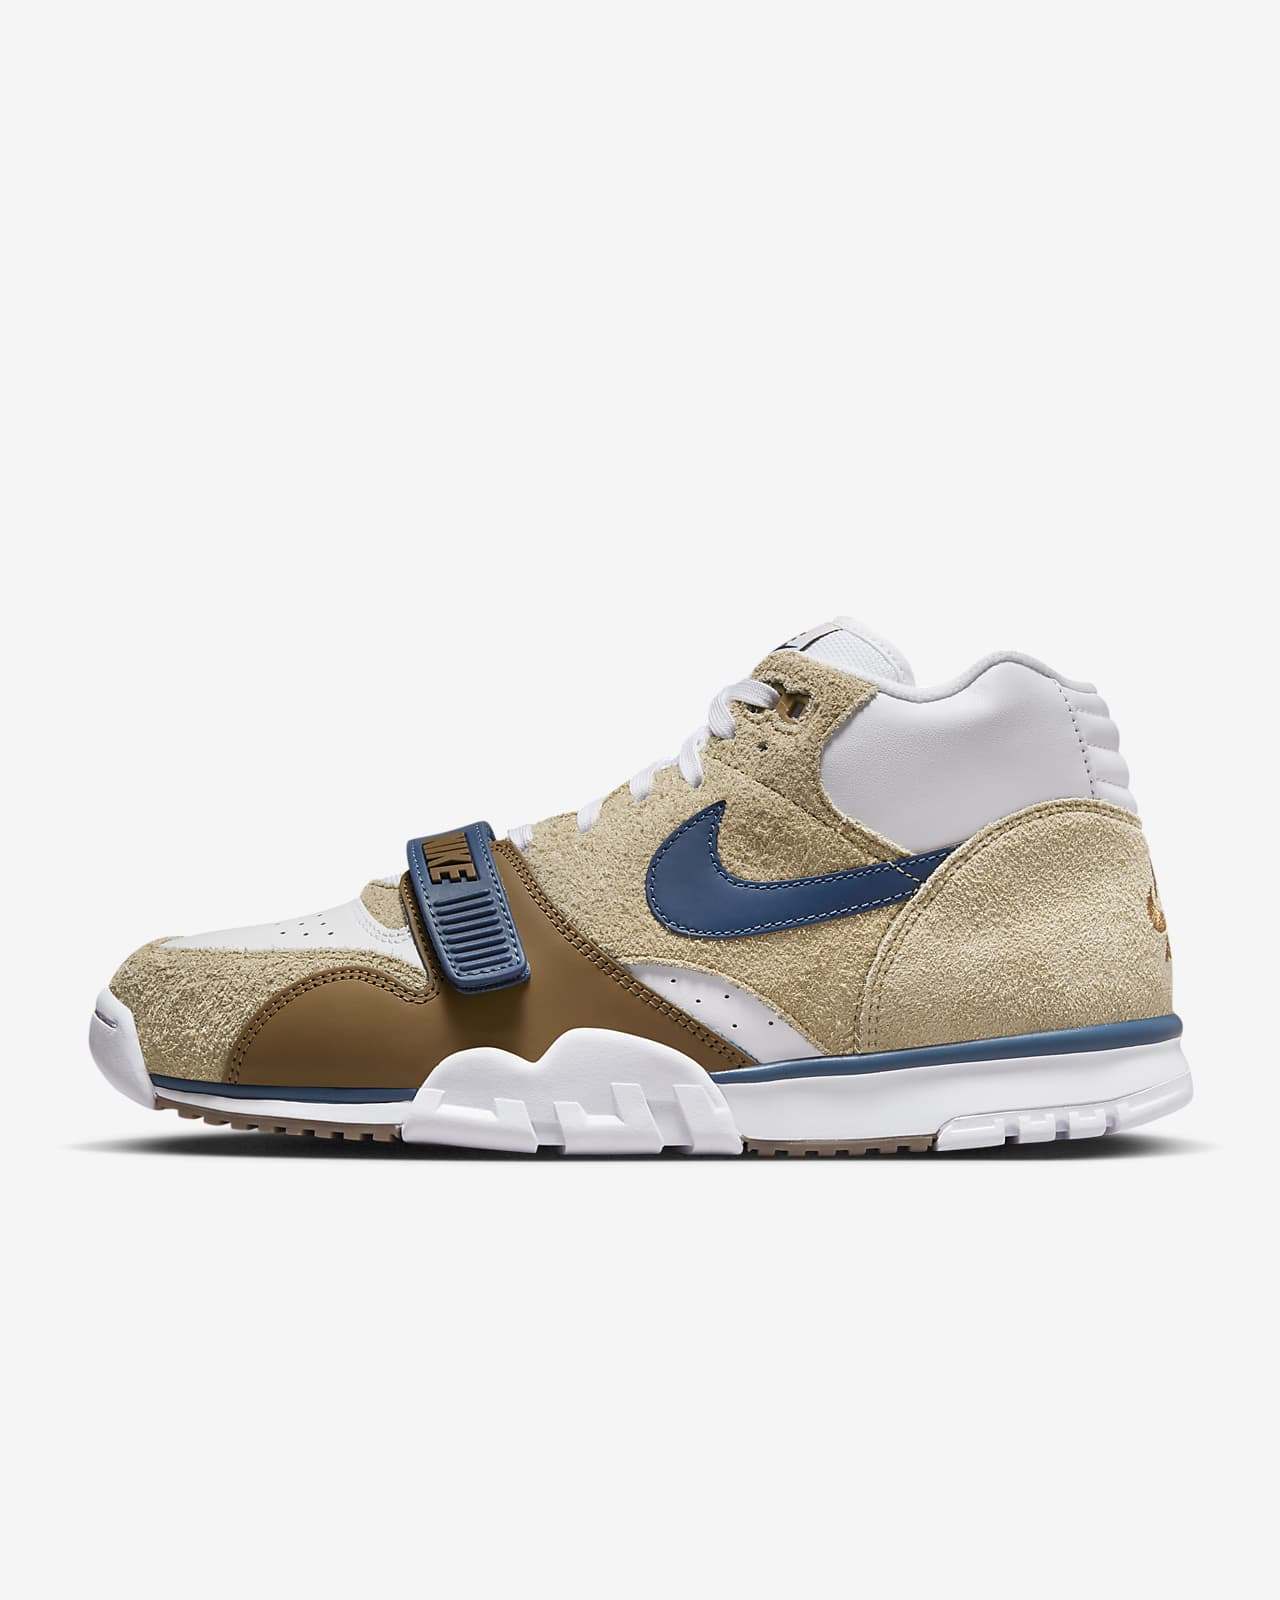 Chaussure Nike Air Trainer 1 pour Homme.